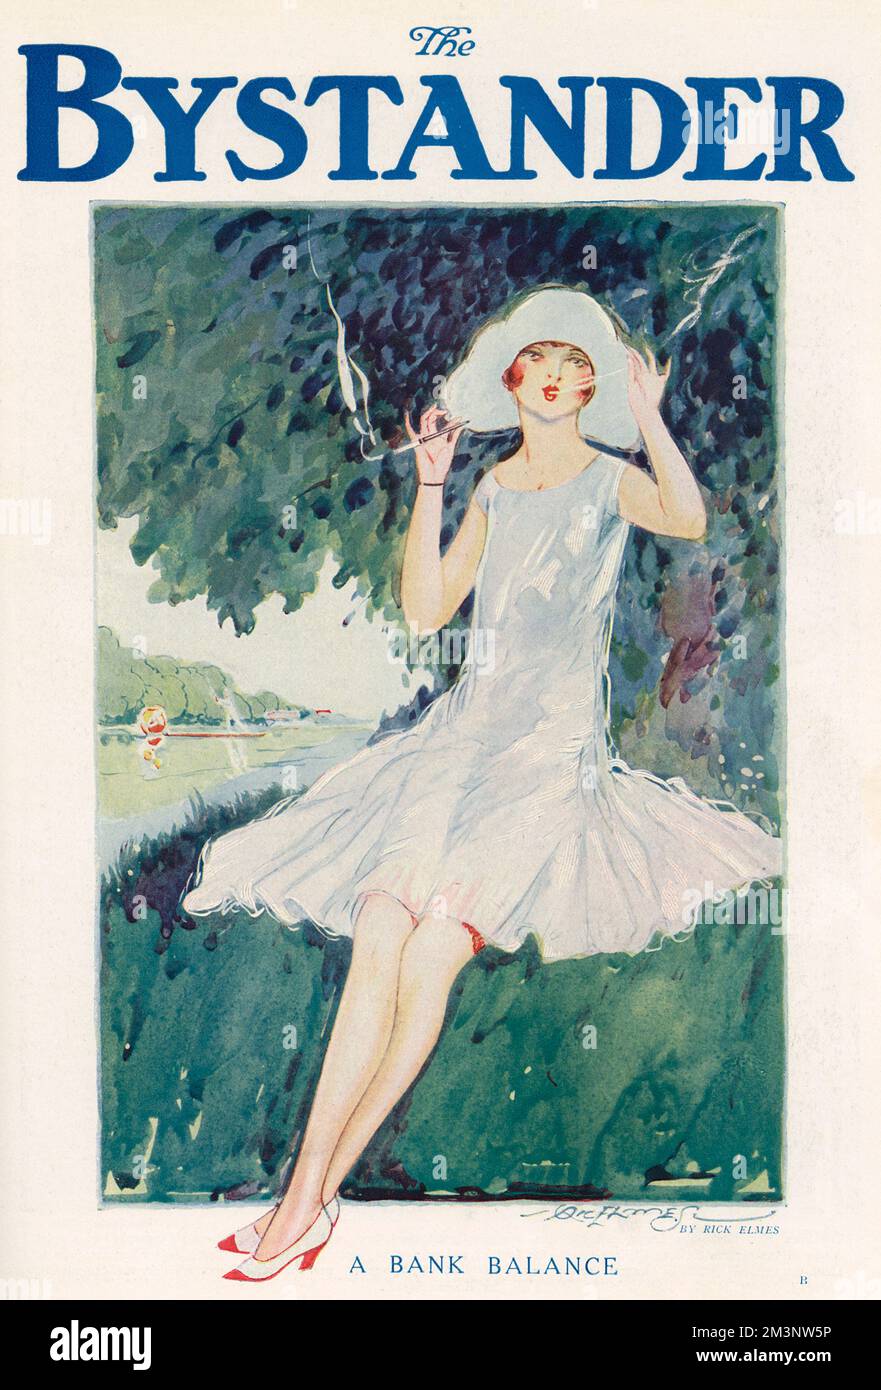 Front cover of The Bystander magazine featuring an illustration of a young woman in a white hat and dress, languidly smoking using a long, elegant cigarette holder as she perches on a grassy bank.     Date: 1927 Stock Photo